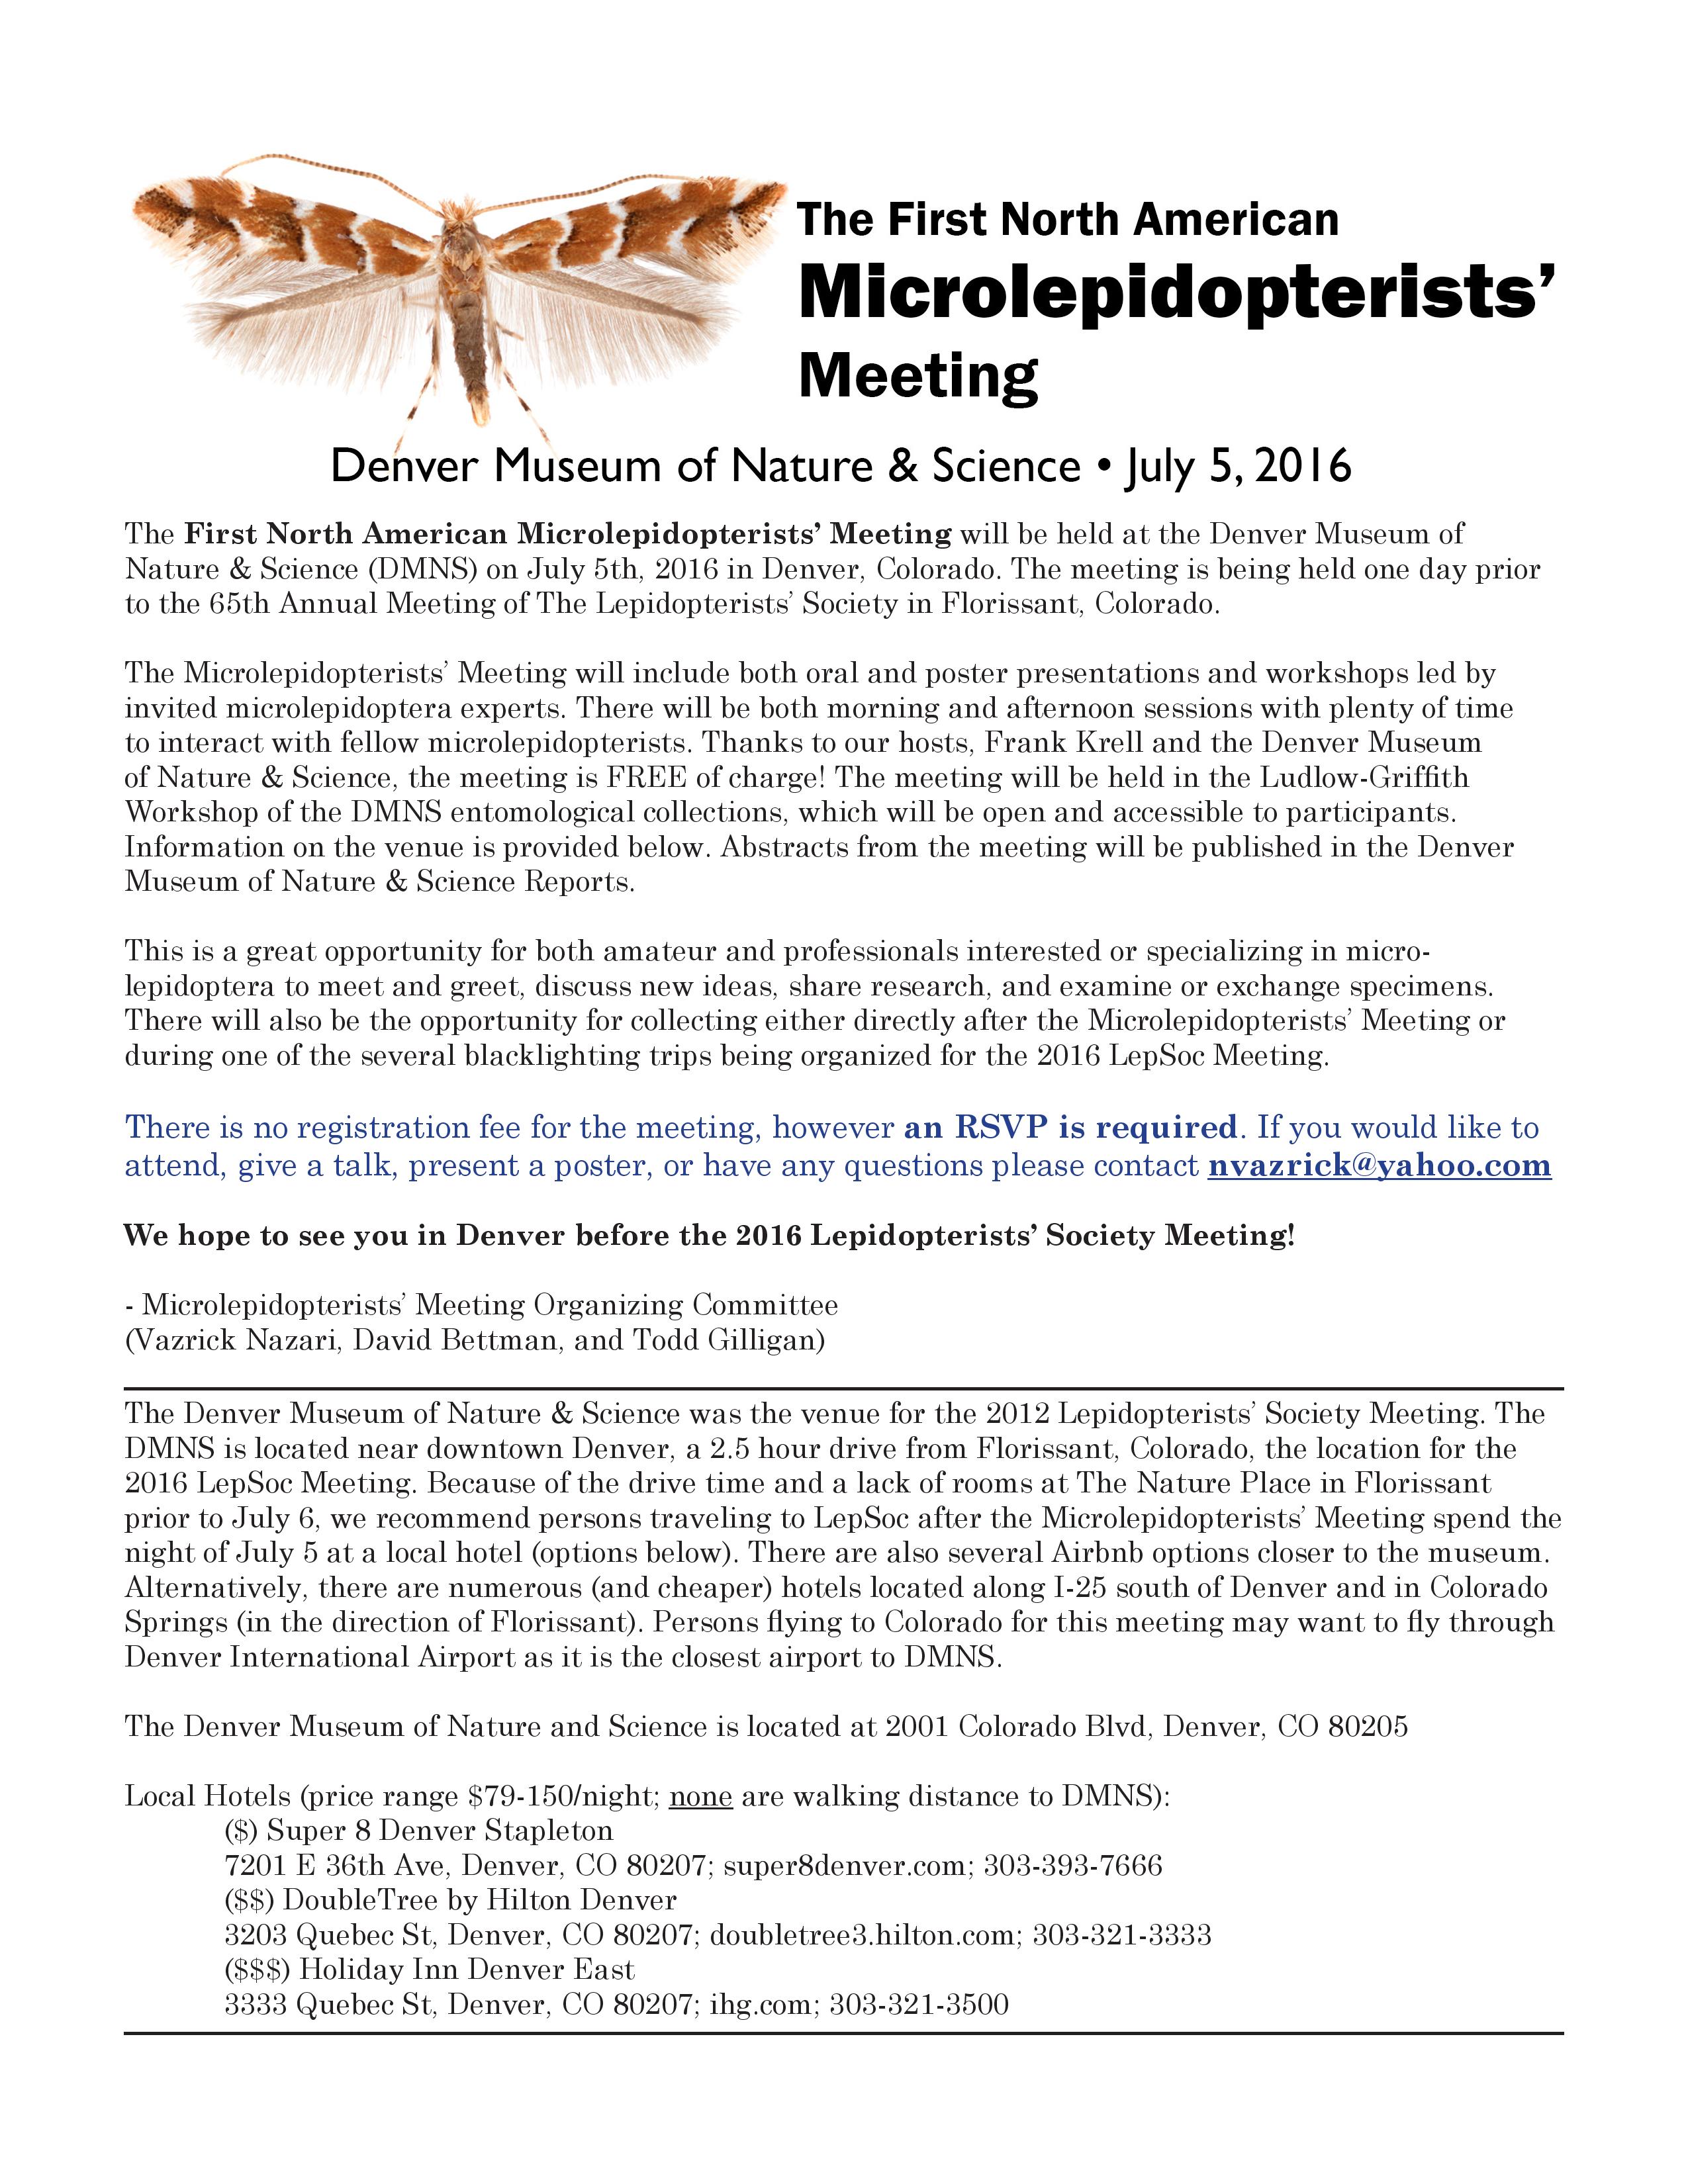 Micro lepidopterists' Meeting 2016 Announcement